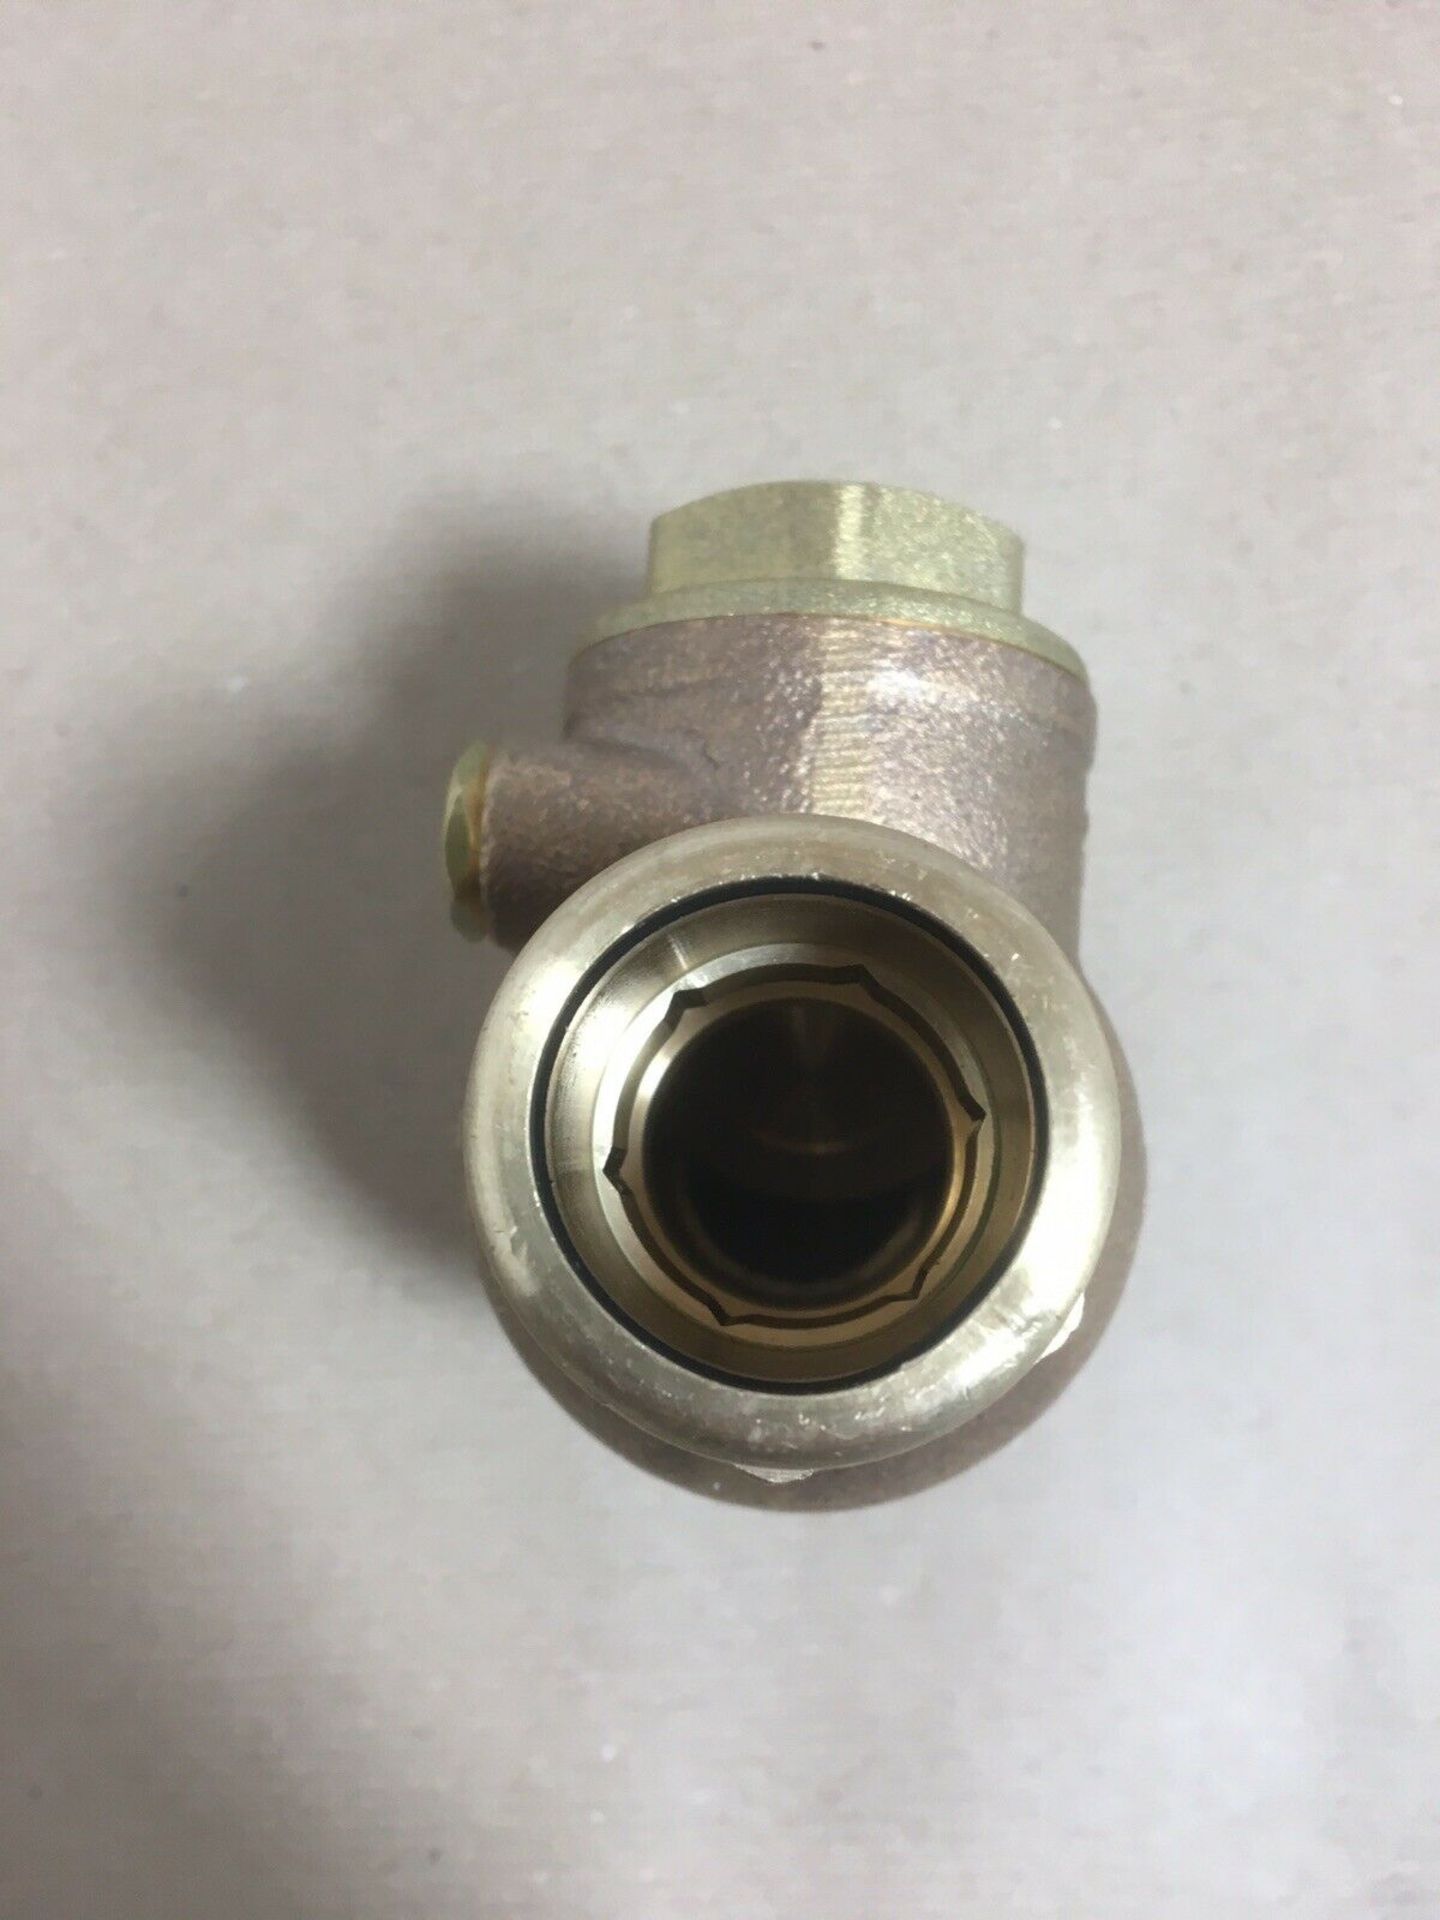 3 x Pegler PS1060A Press-fit Swing Check Valve, XPress Ends For Steel Tube - Image 5 of 5